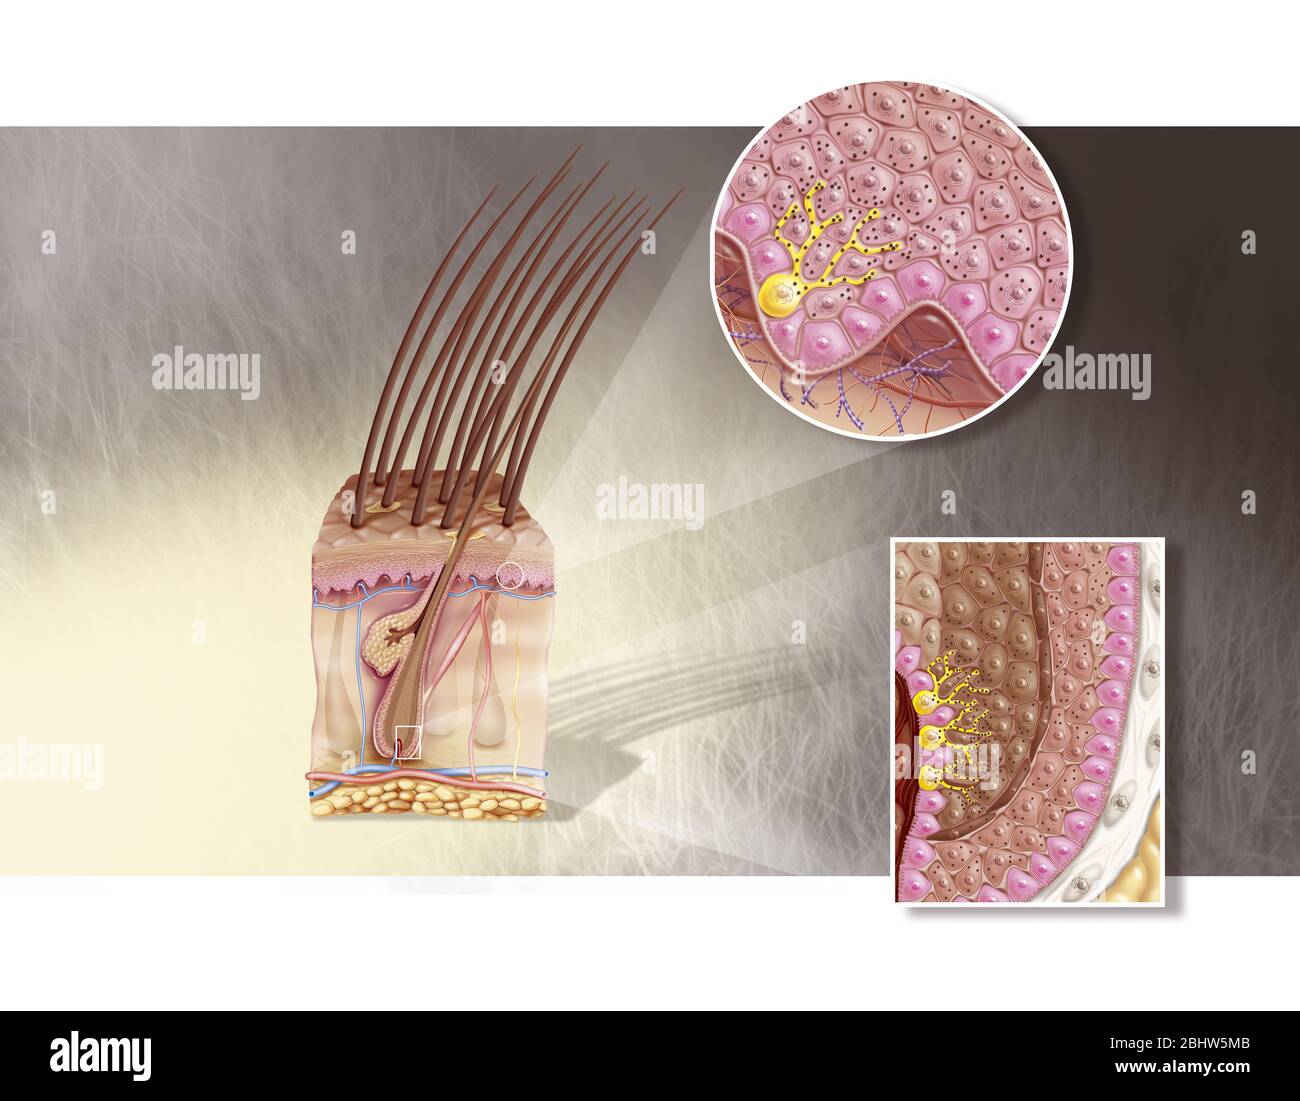 Medical illustration showing the melanocytes (in yellow) at the epidermis of the skin in section and the root of the hair. Zoom of the epidermis (top Stock Photo